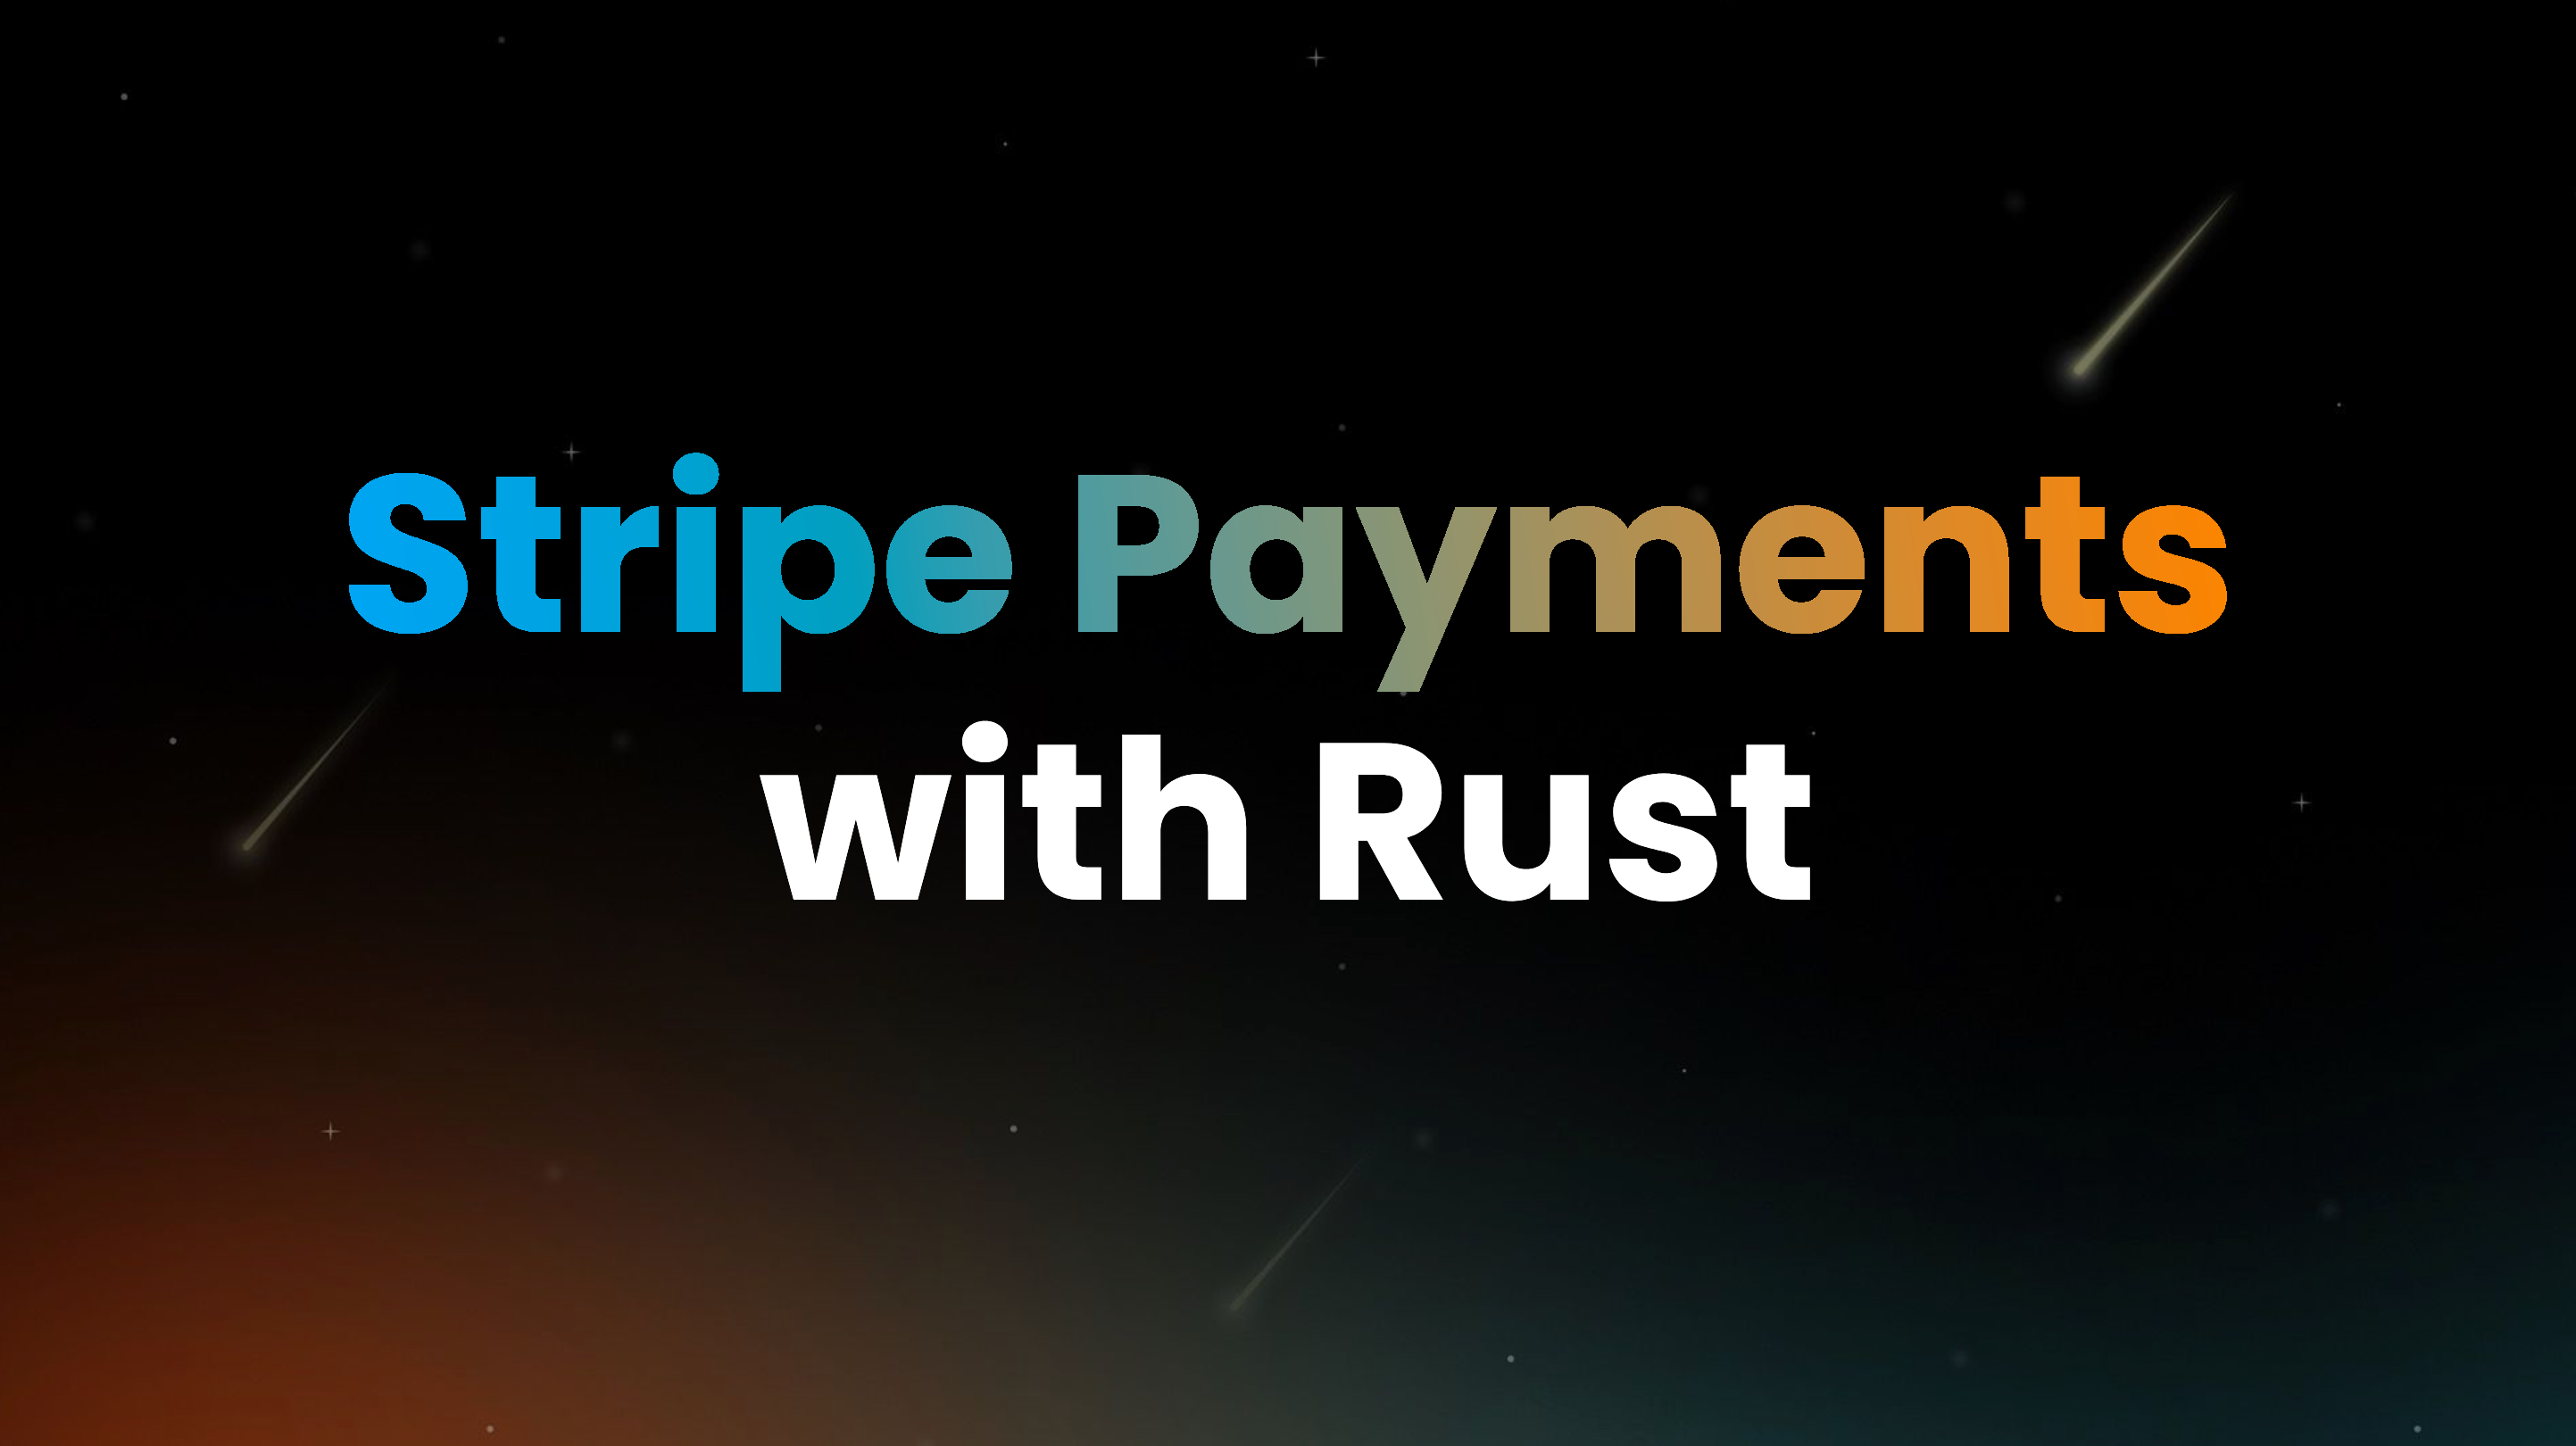 Using Stripe Payments with Rust